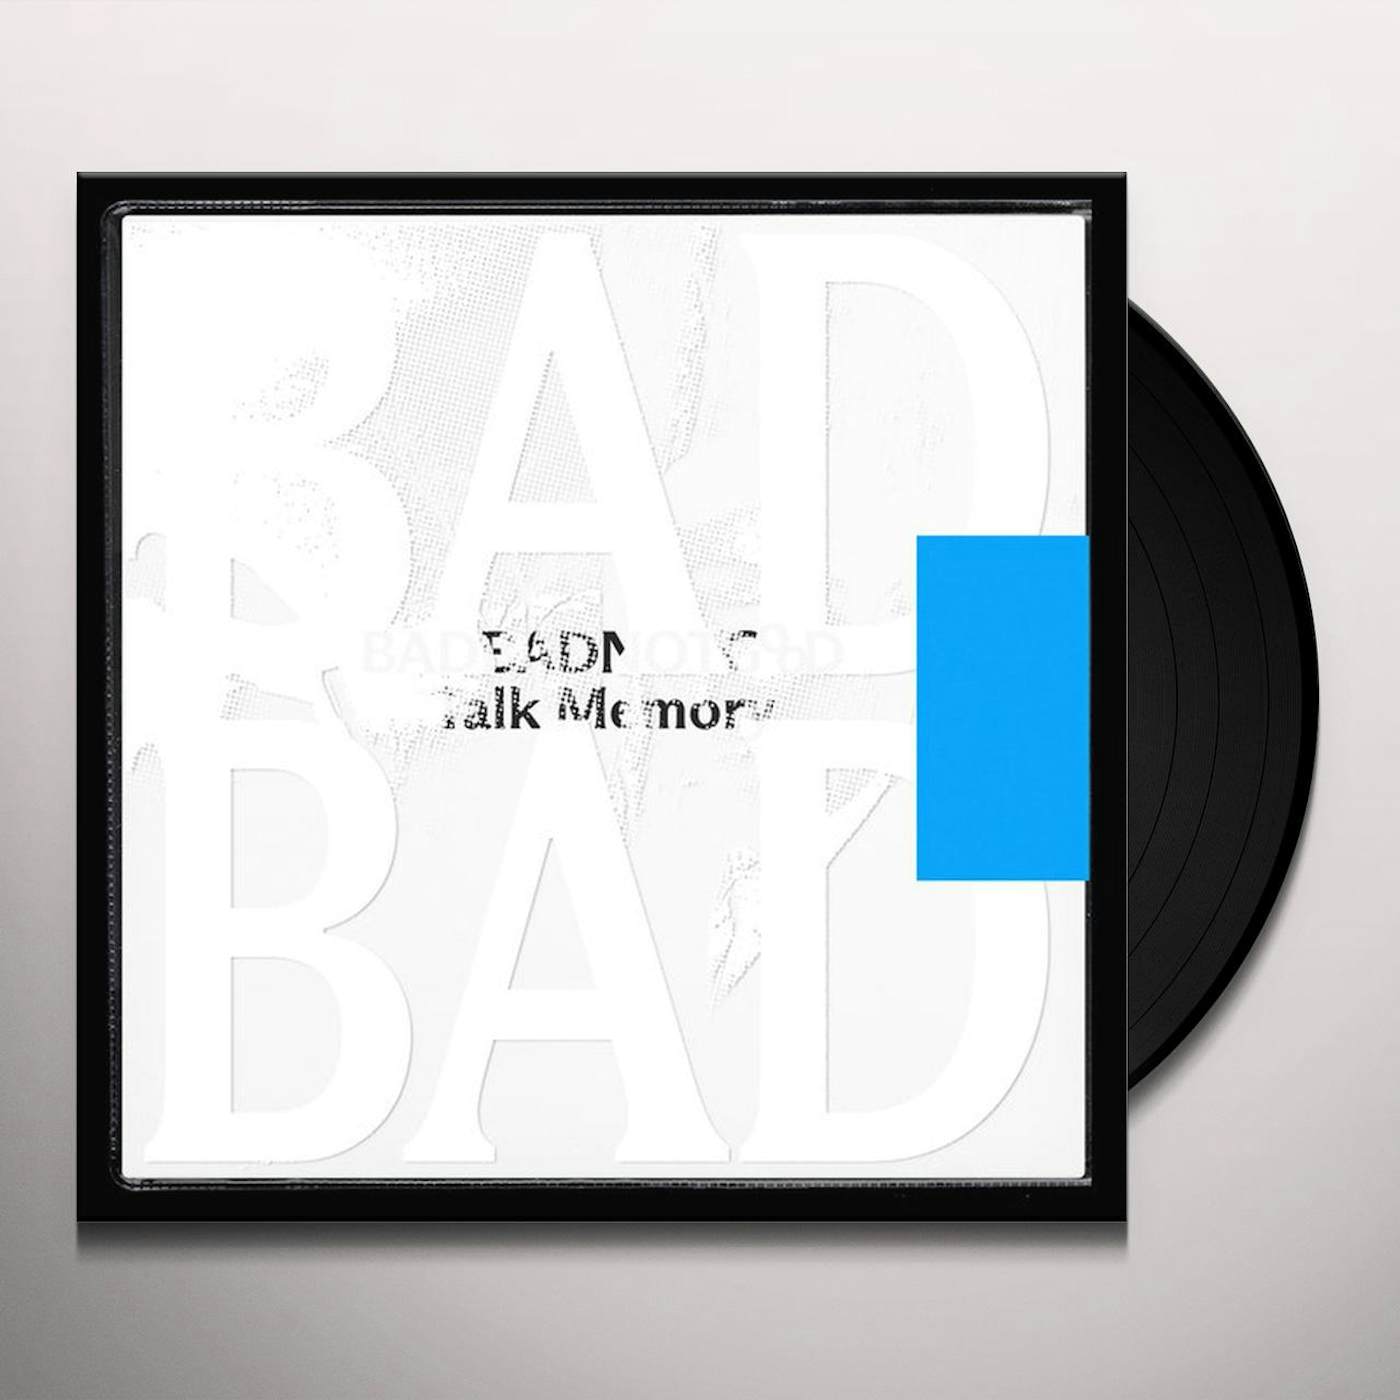 BADBADNOTGOOD's 'Talk Memory' is inaccessible to average listener